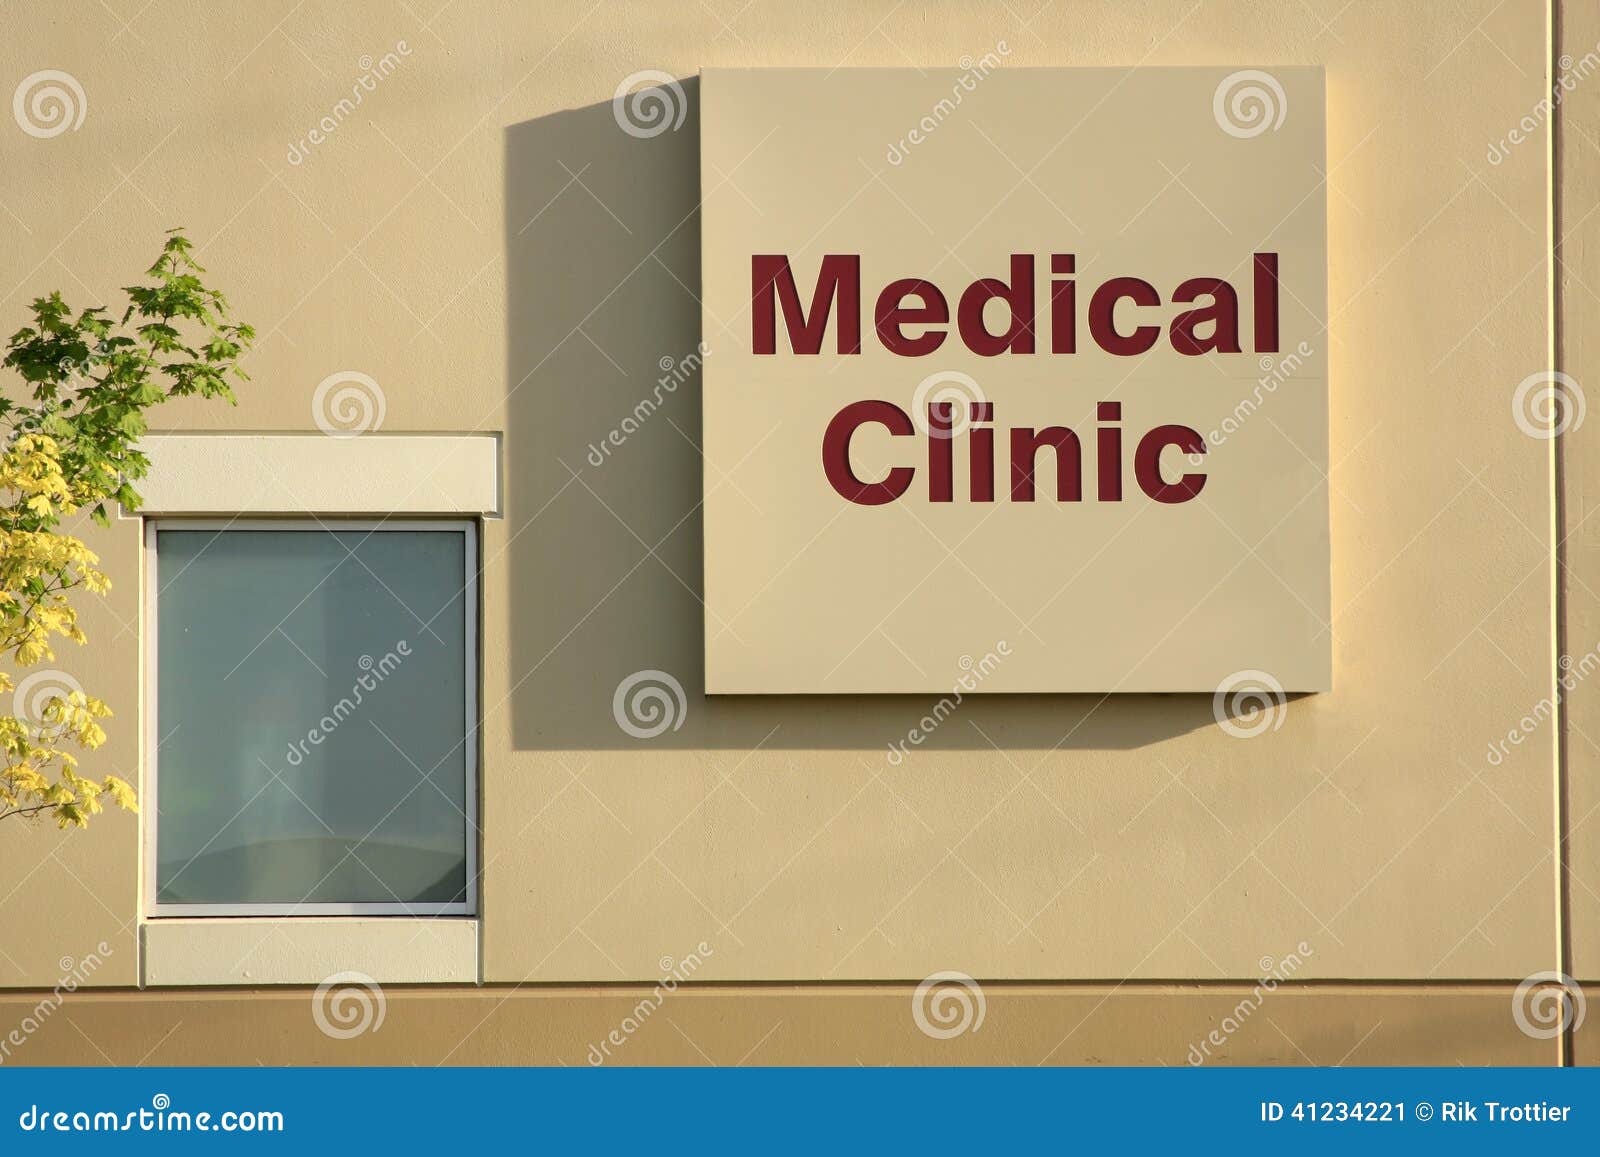 medical clinic